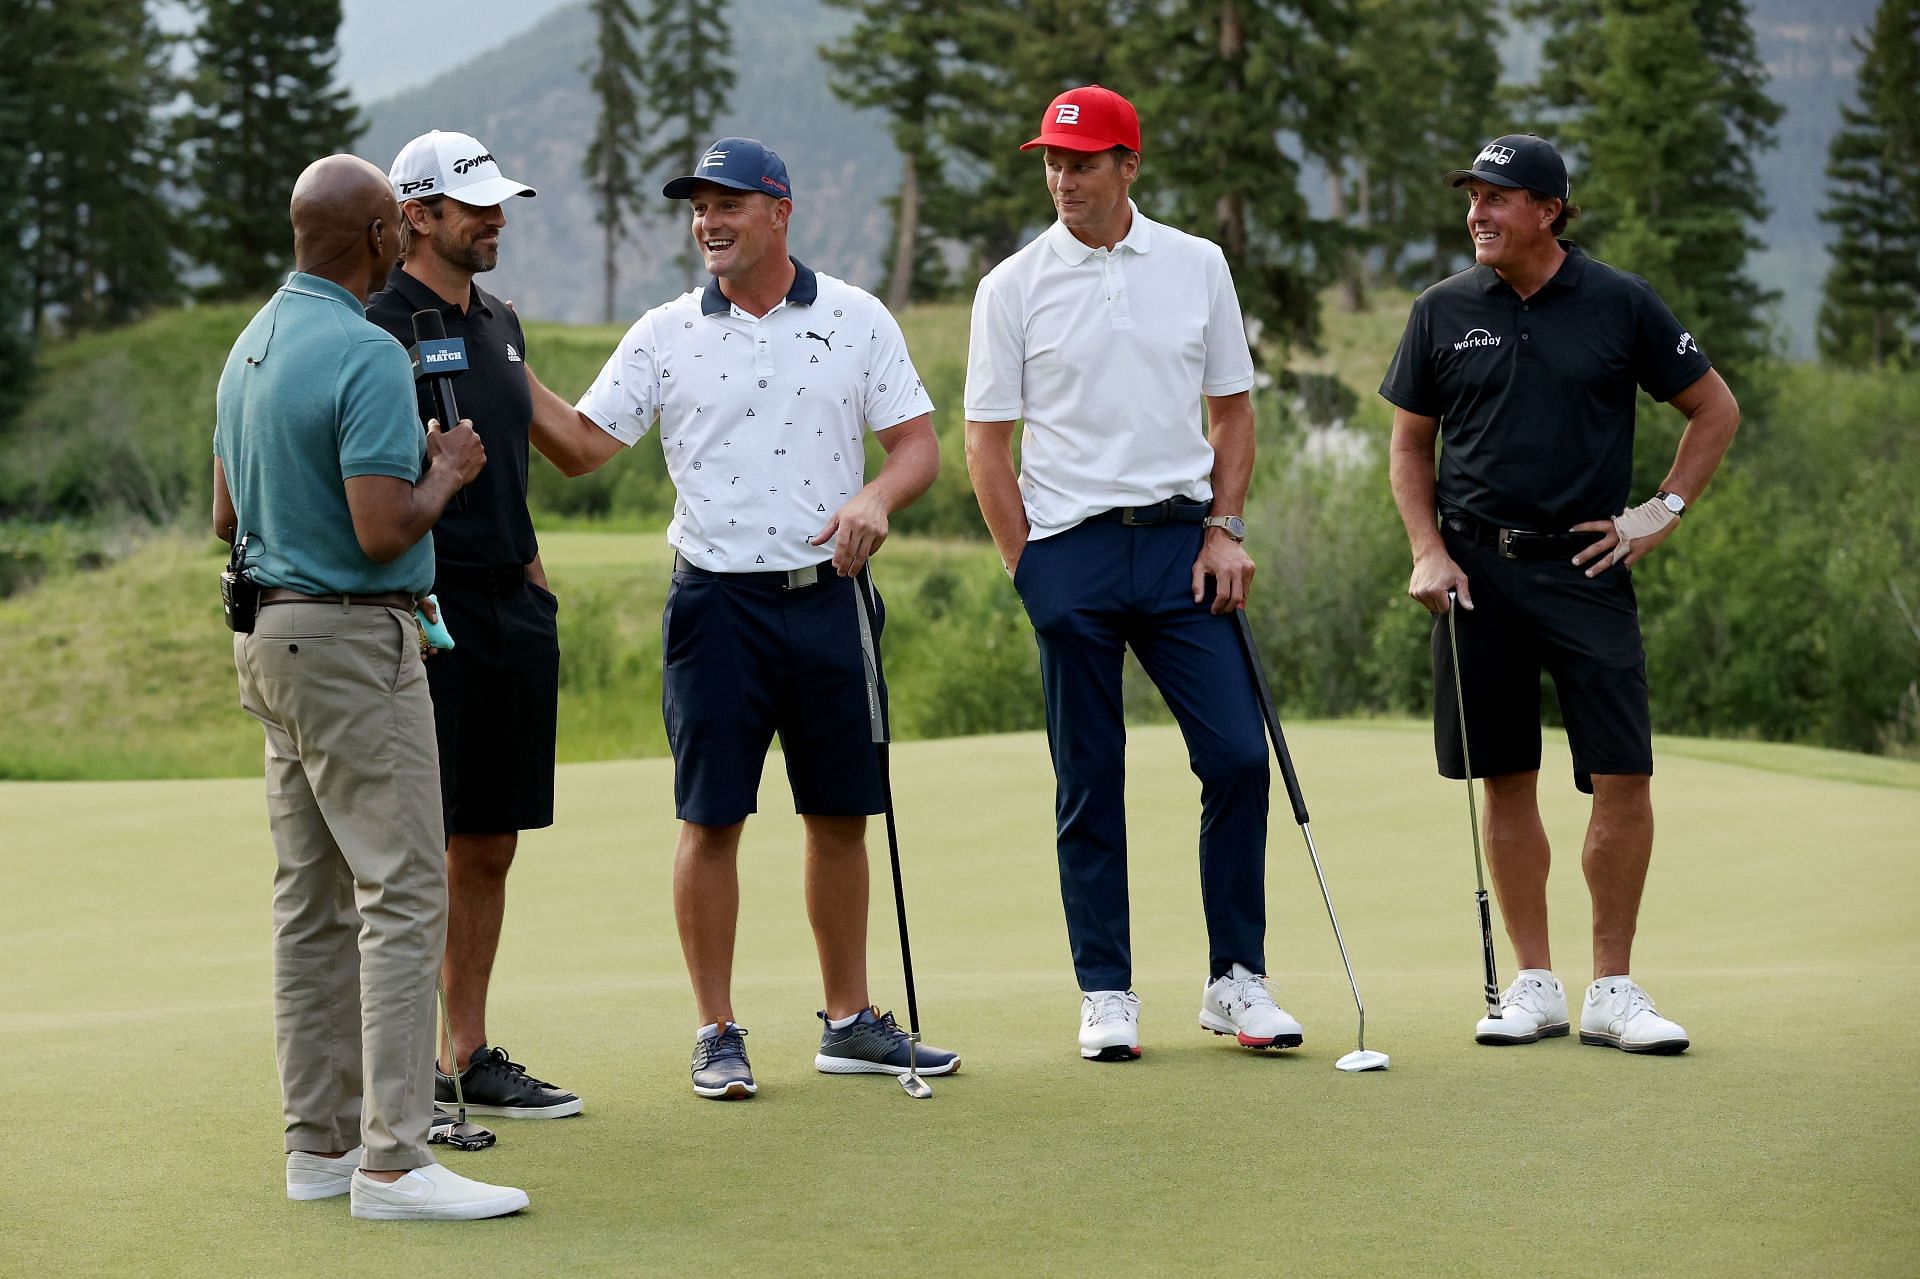 From left: Aaron Rodgers, Bryson DeChambeau, Tom Brady, and Phil Mickelson